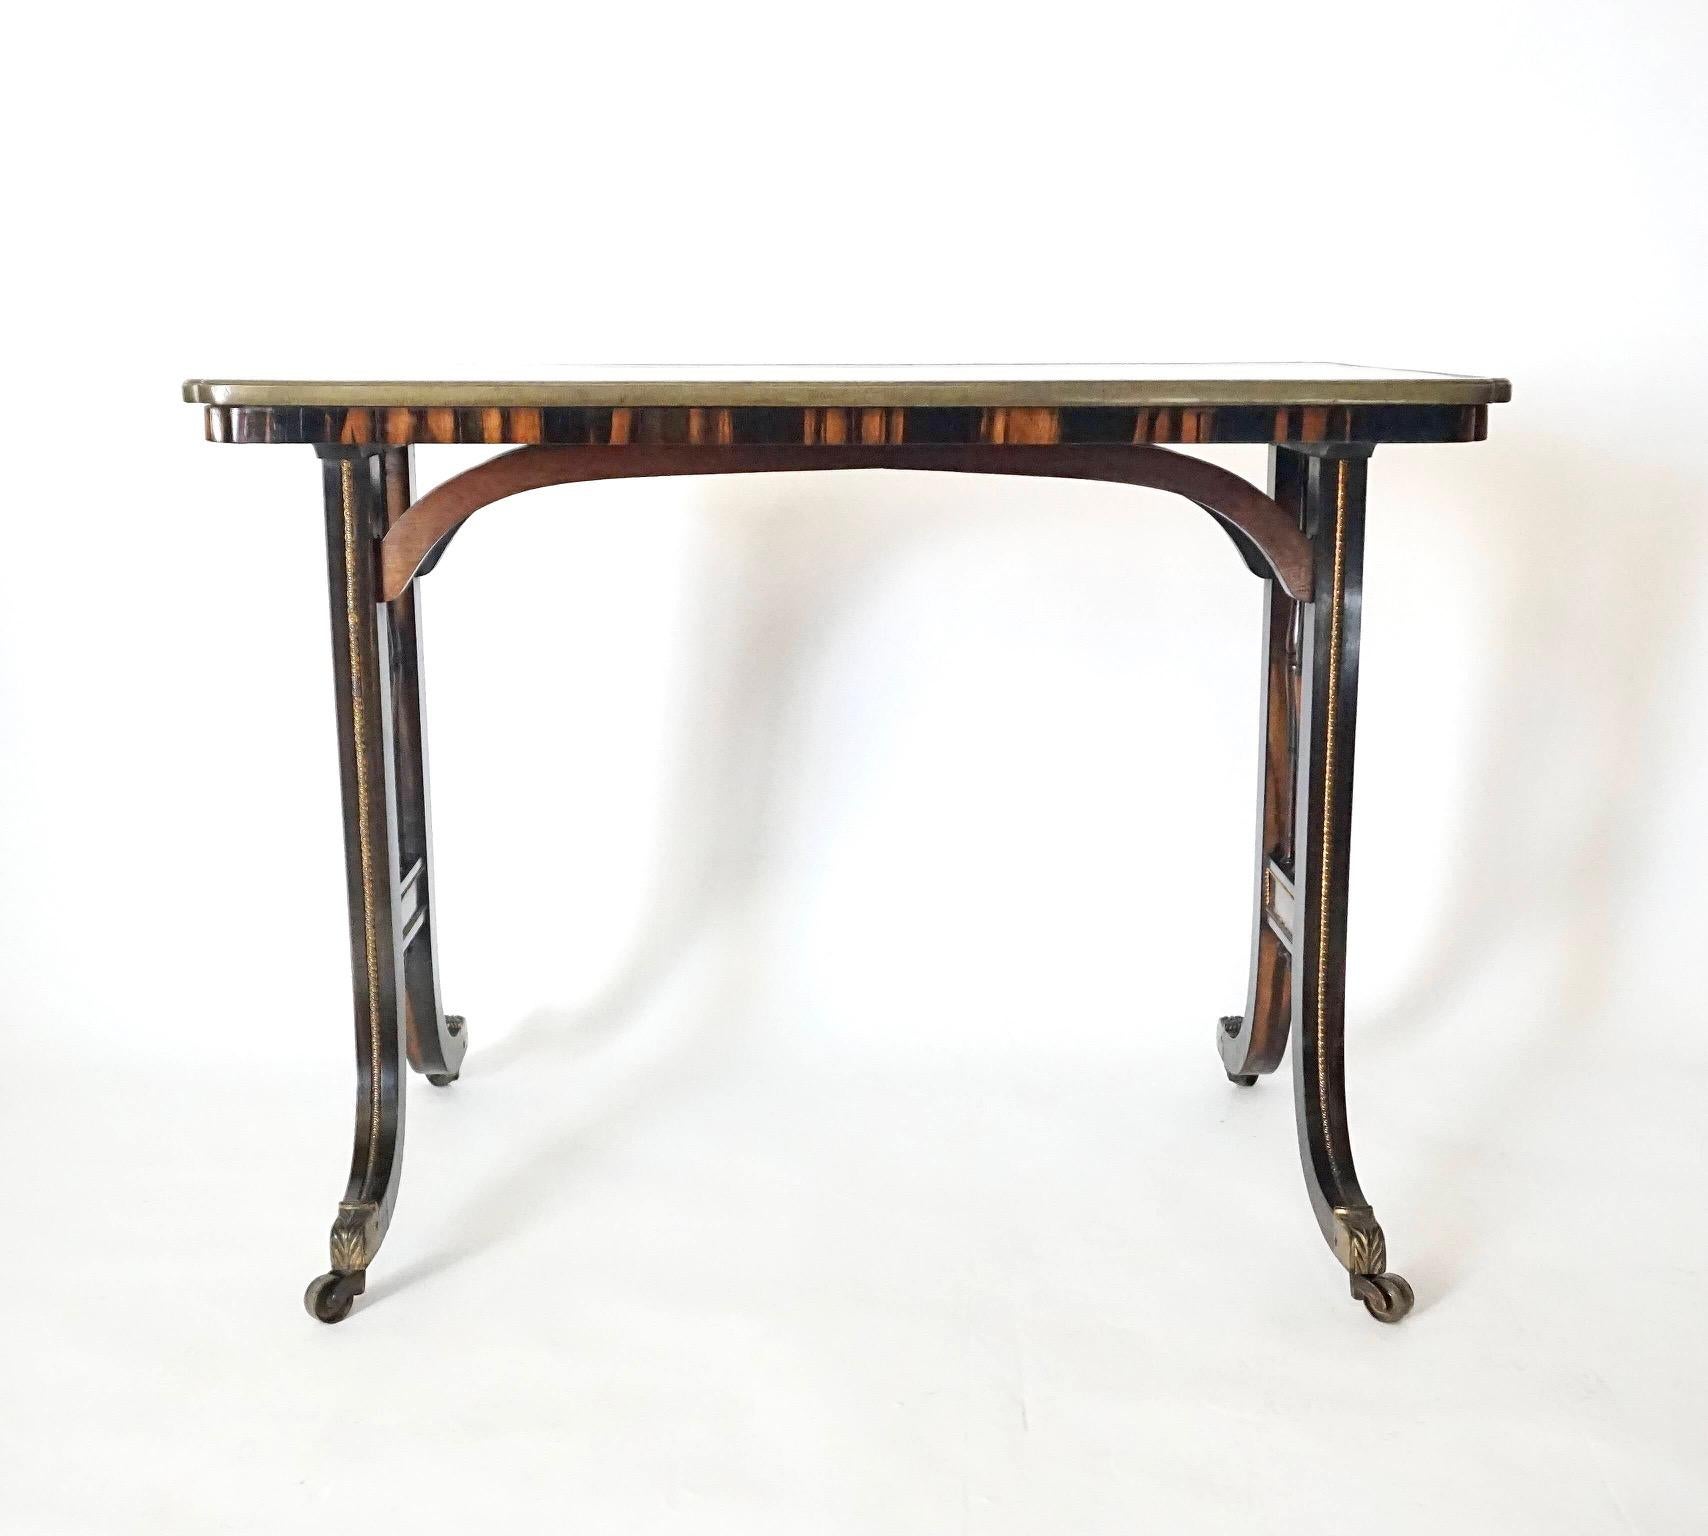 English Regency Brass Mounted Exotic Woods Writing Table, Gillows, circa 1820 In Good Condition For Sale In Kinderhook, NY